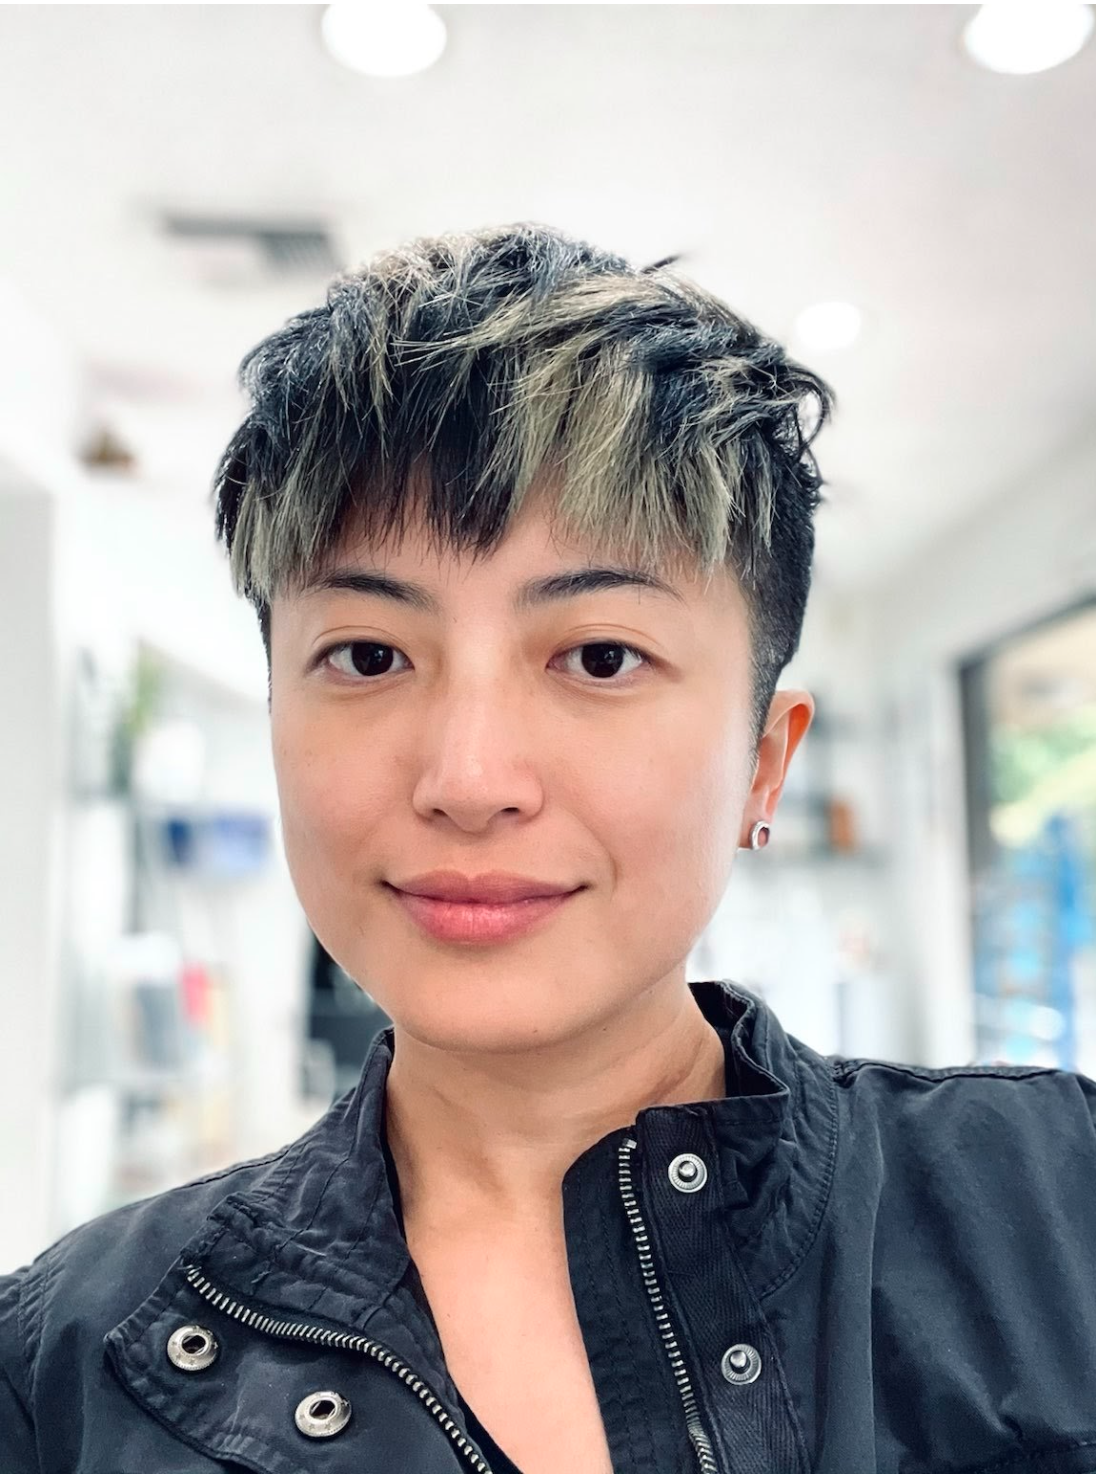  a Han-Taiwanese person with light yellow colored skin and very short hair with blond highlights stands in a sun-filled room in front of multiple shelves